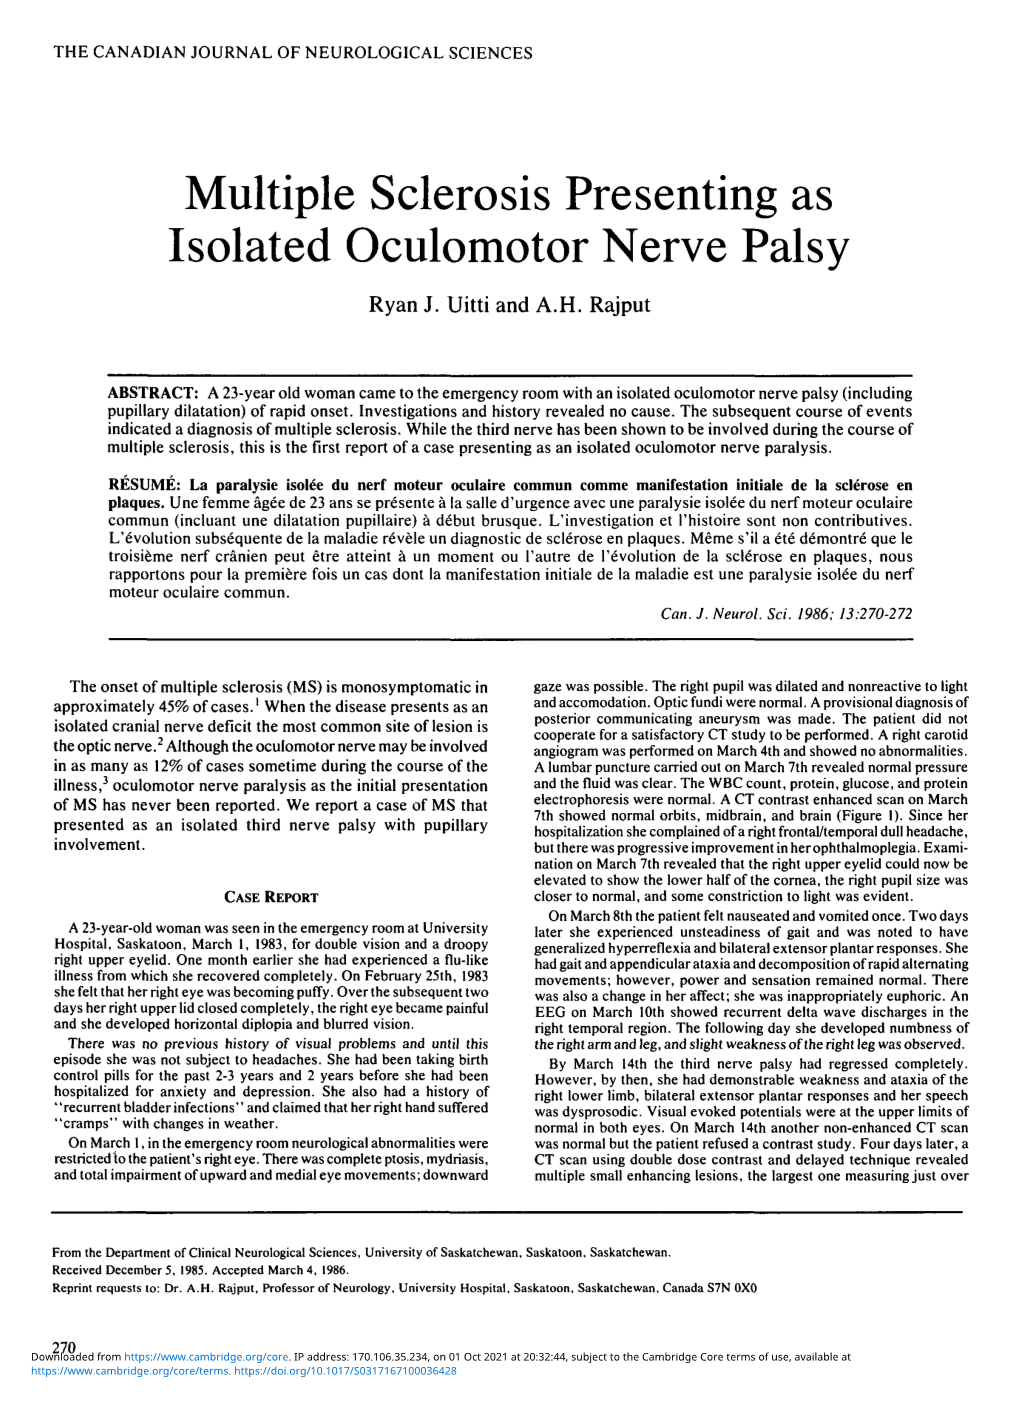 Multiple Sclerosis Presenting As Isolated Oculomotor Nerve Palsy Ryan J